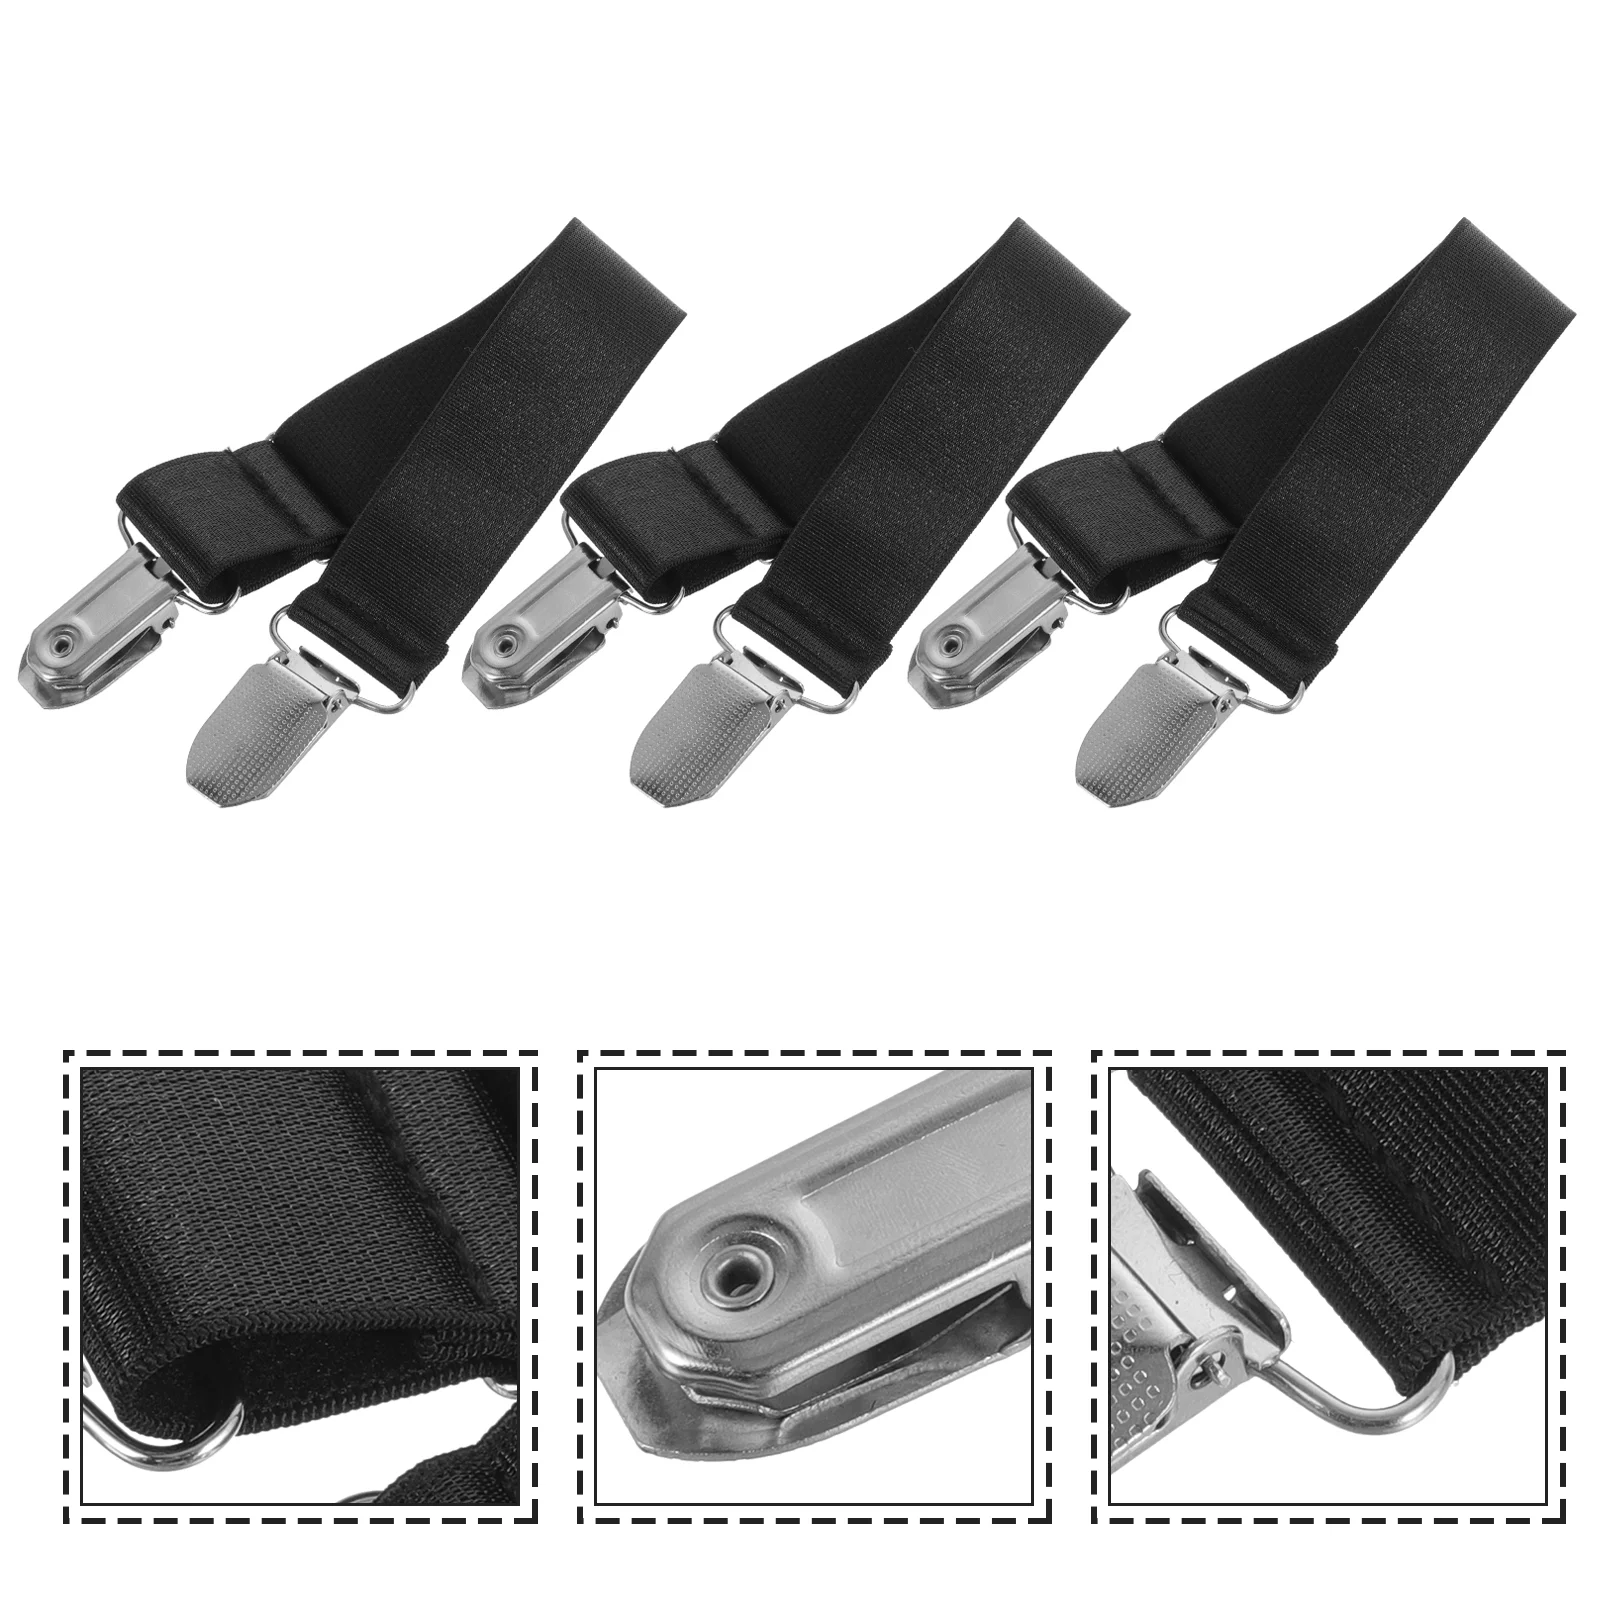 6 Pcs Boot Clip Motorcycle Riding Pant Leg Luggage Loop Strap Tie down S... - $16.54